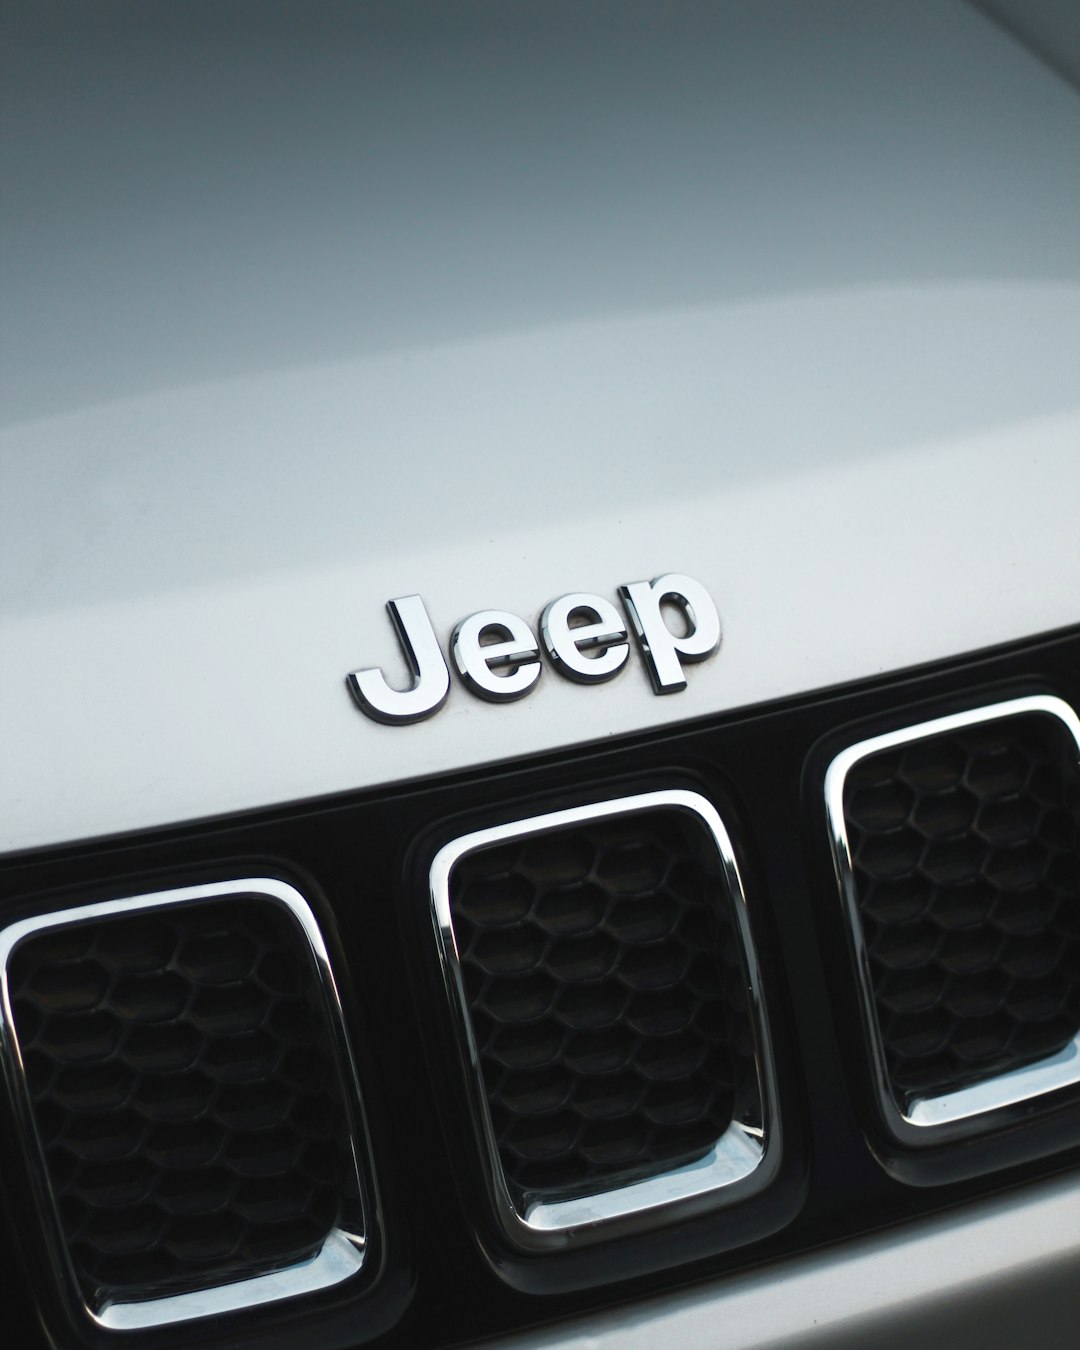 The Jeep Wrangler Unlimited is a rugged and versatile SUV designed for off-road adventures.